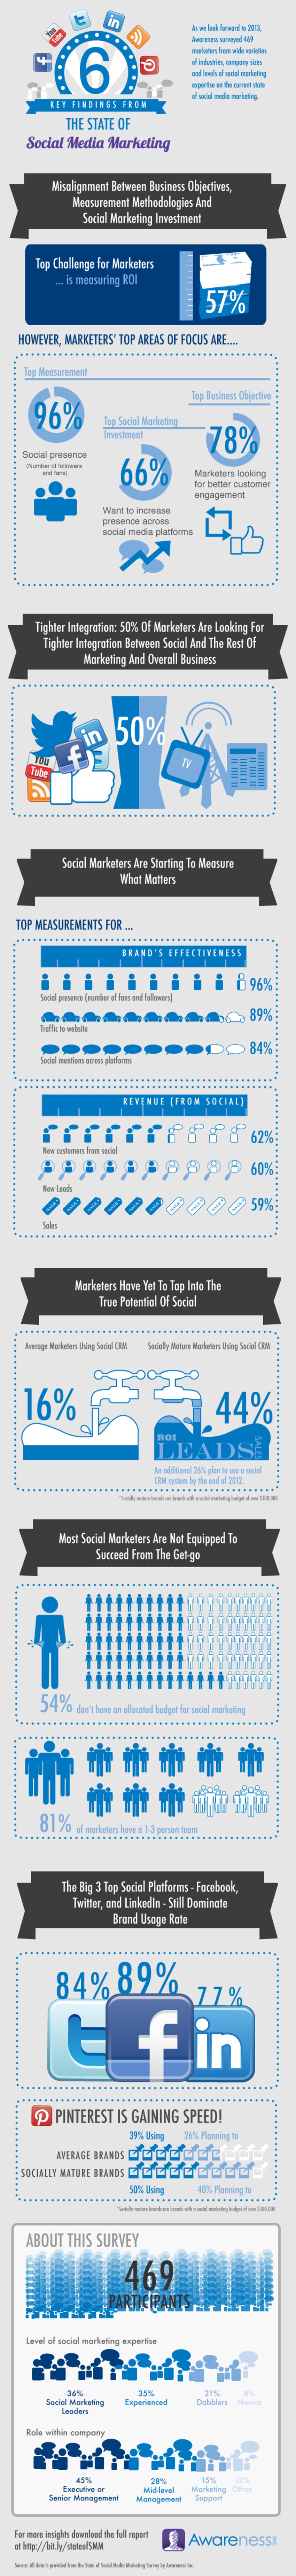 Infographic: State of Social Media Marketing | The MarTech Digest | Scoop.it